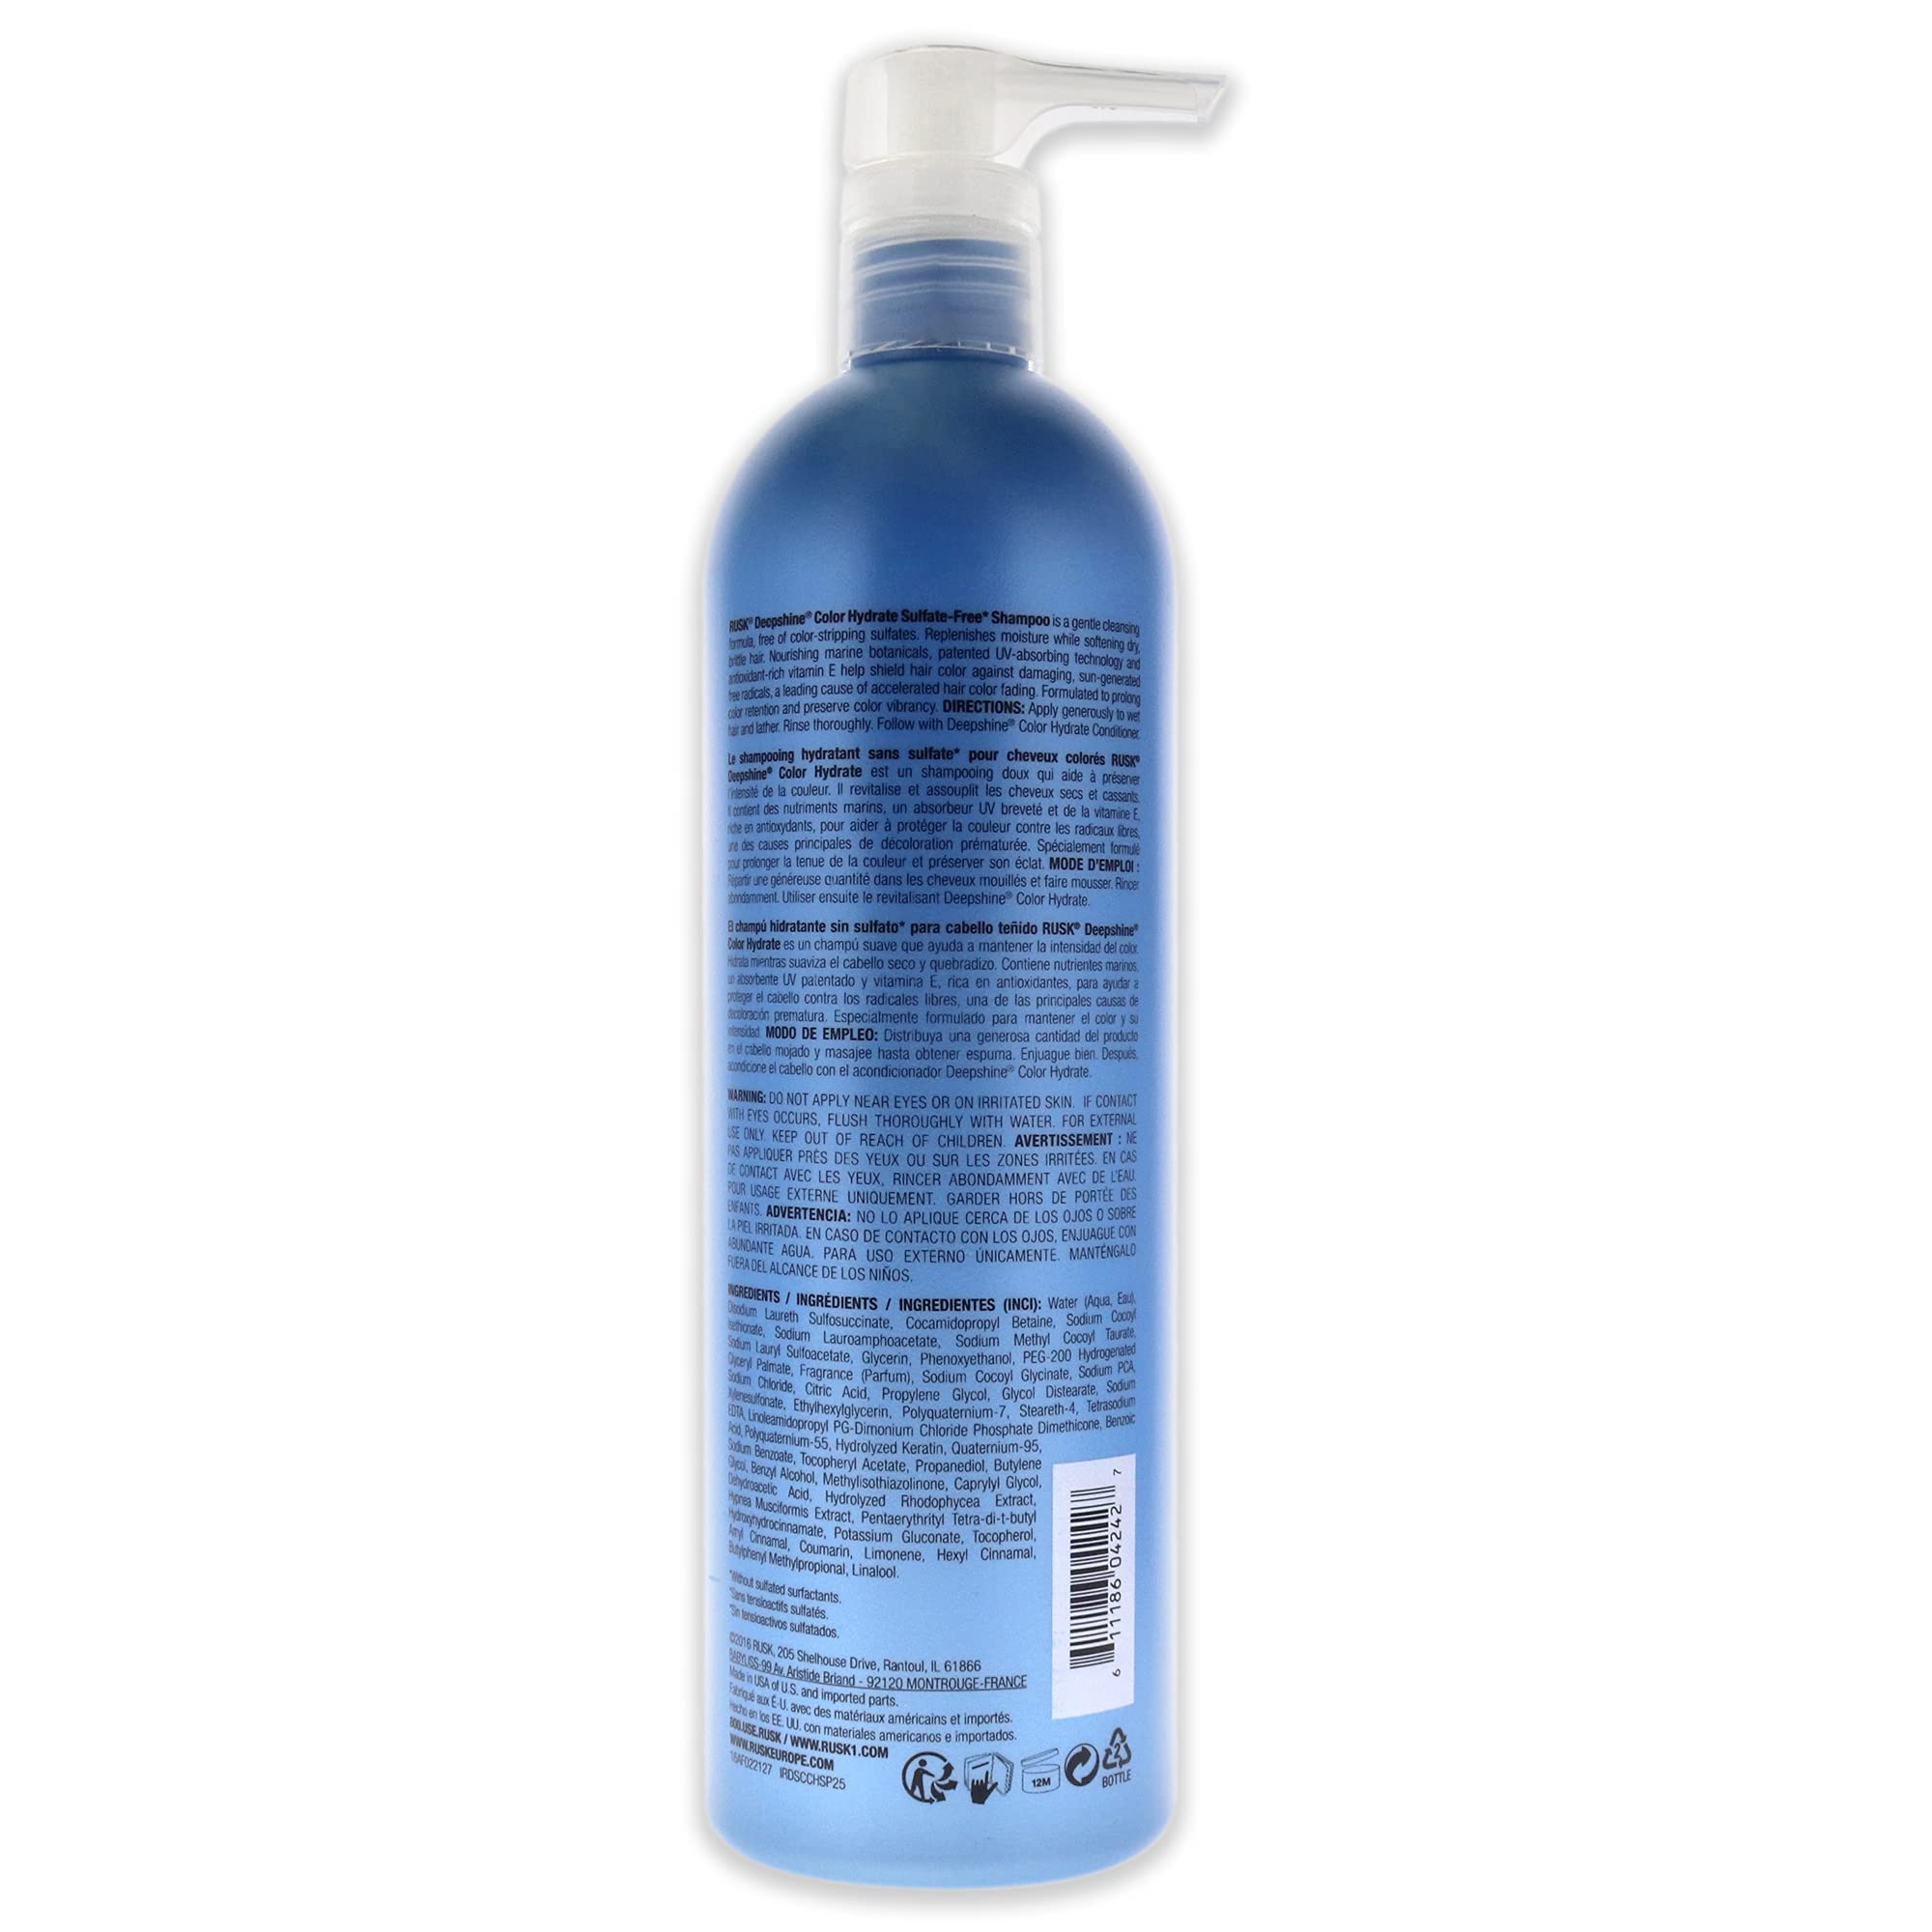 RUSK Deepshine Color Hydrate Sulfate-Free Shampoo, Cleanses, Replenishes Moisture, Infused with Nourishing Marine Botanicals, UV-Absorbing Technology Prolongs Color Retention and Vibrancy